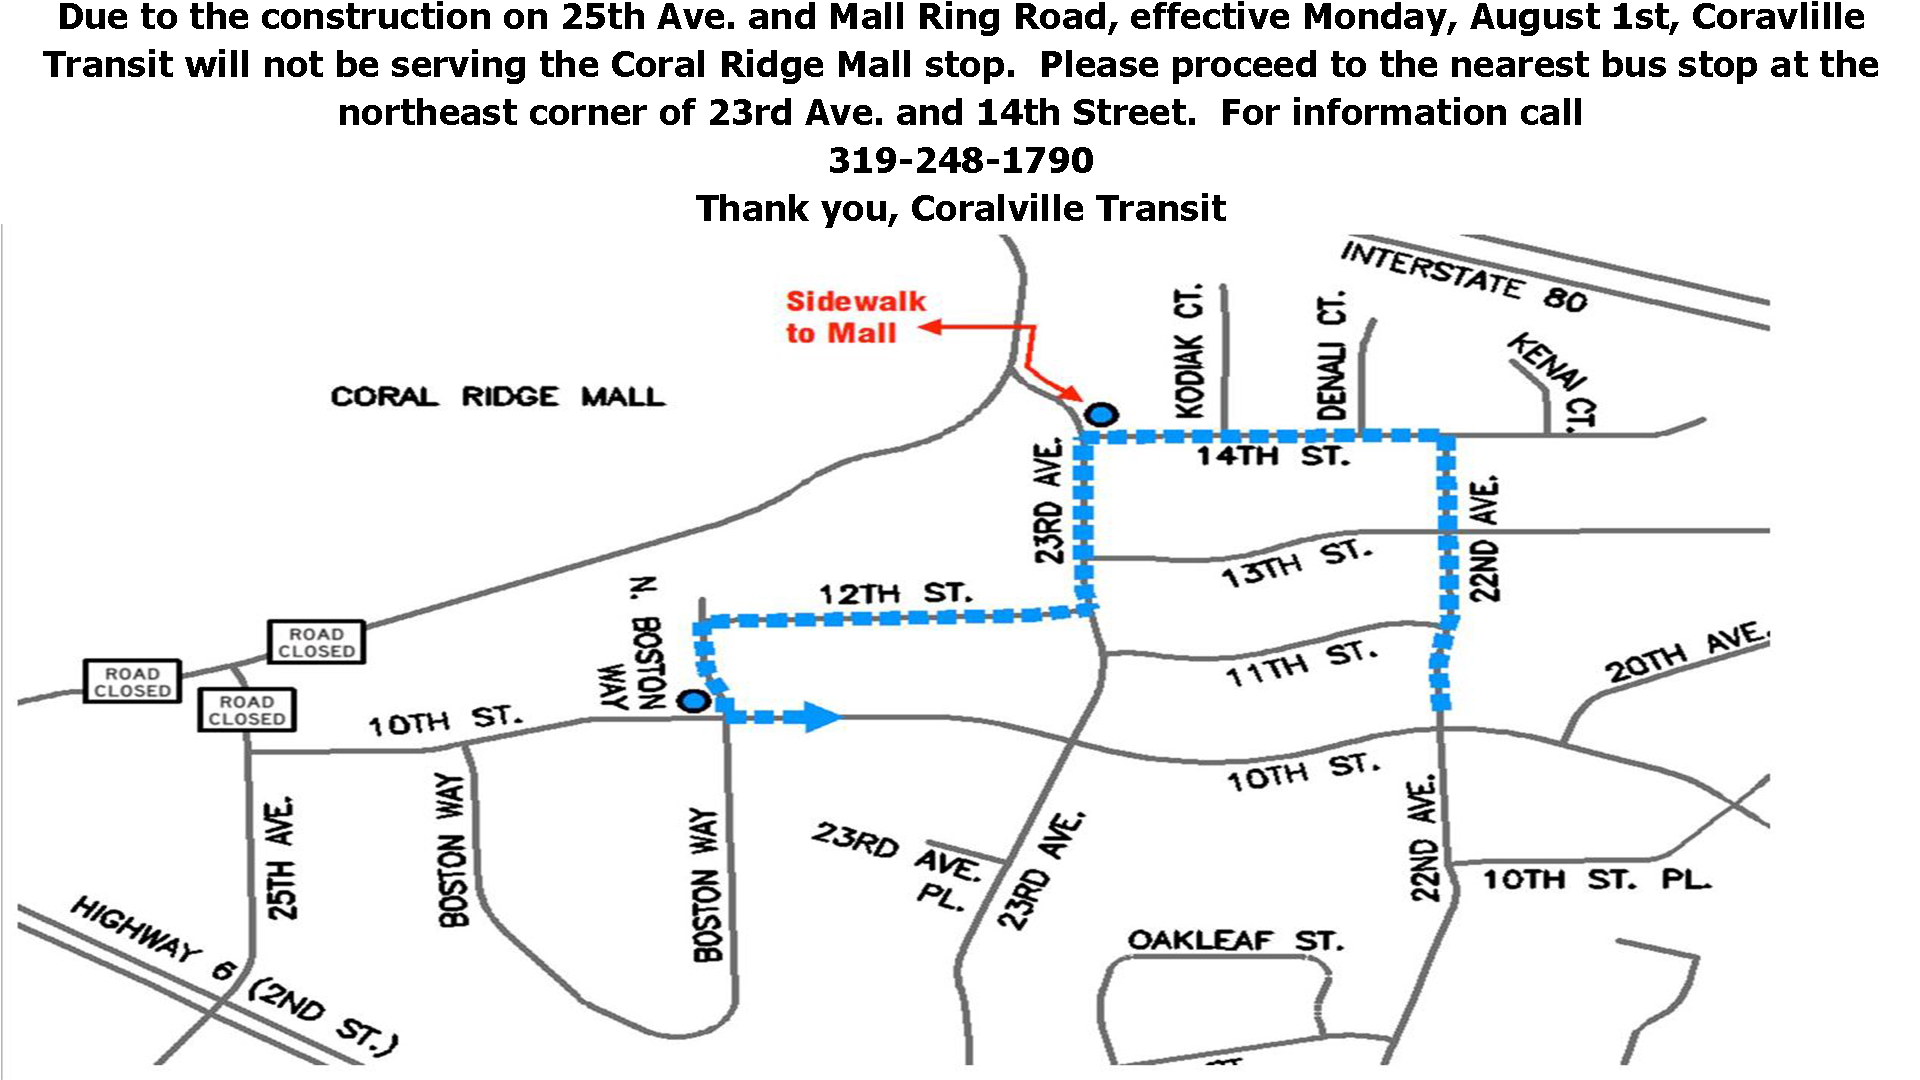 Due to constuction on 25th ave and Mall Ring road, transit will not be serving the Coral Ridge Mall stop. Please proceed to nearest bus stop at the northeast corner of 23rd ave and 14th street. For more information call 319-248-1790.